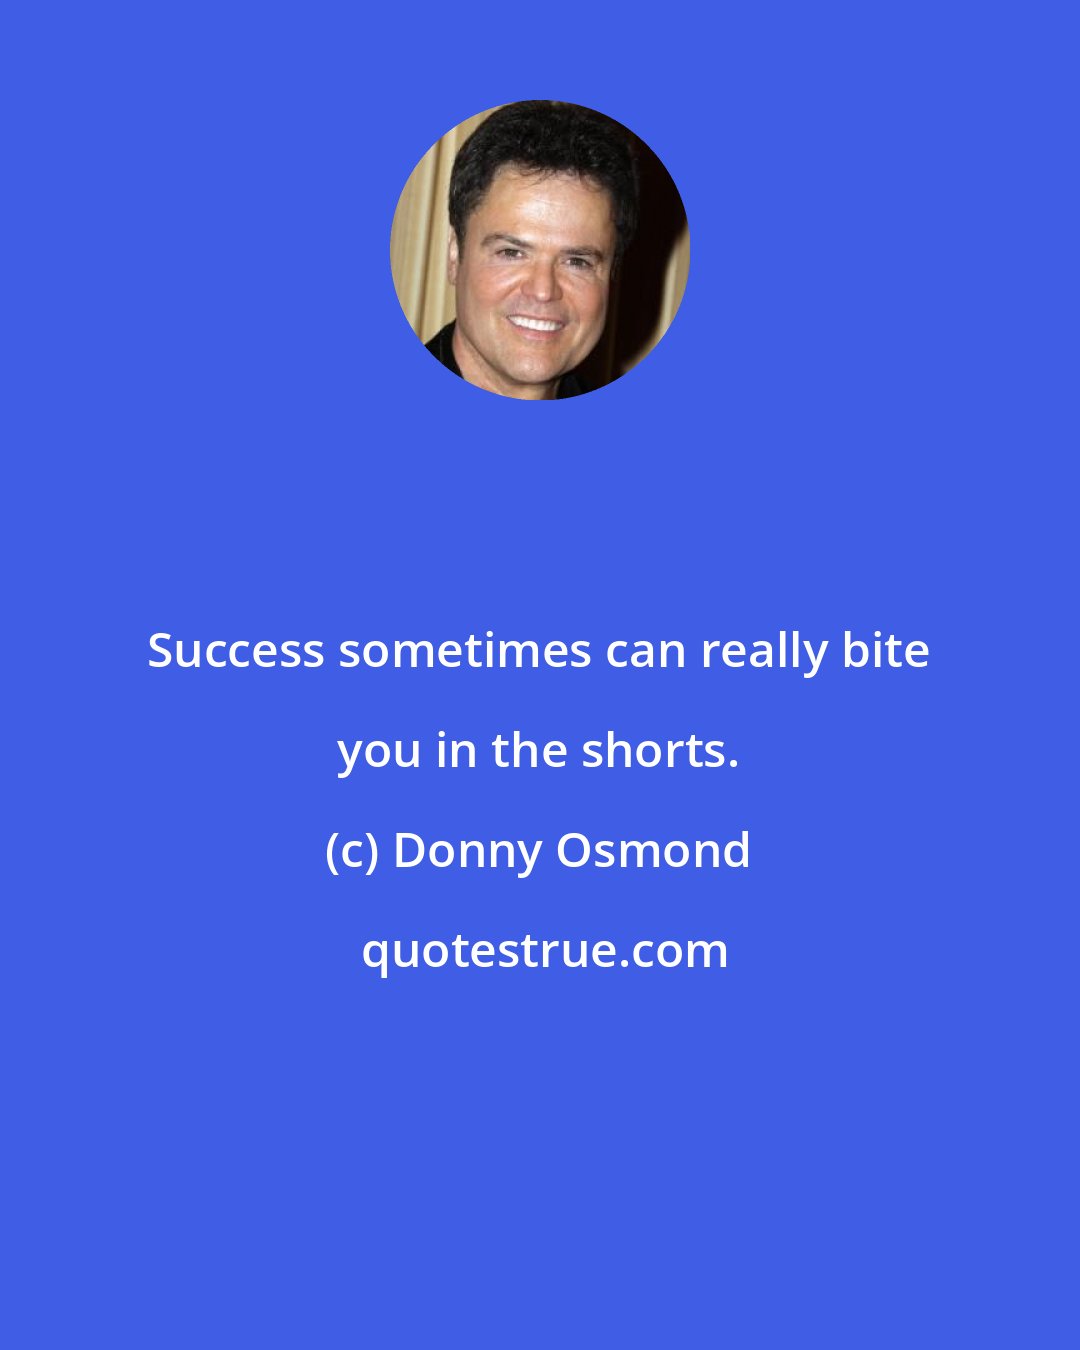 Donny Osmond: Success sometimes can really bite you in the shorts.